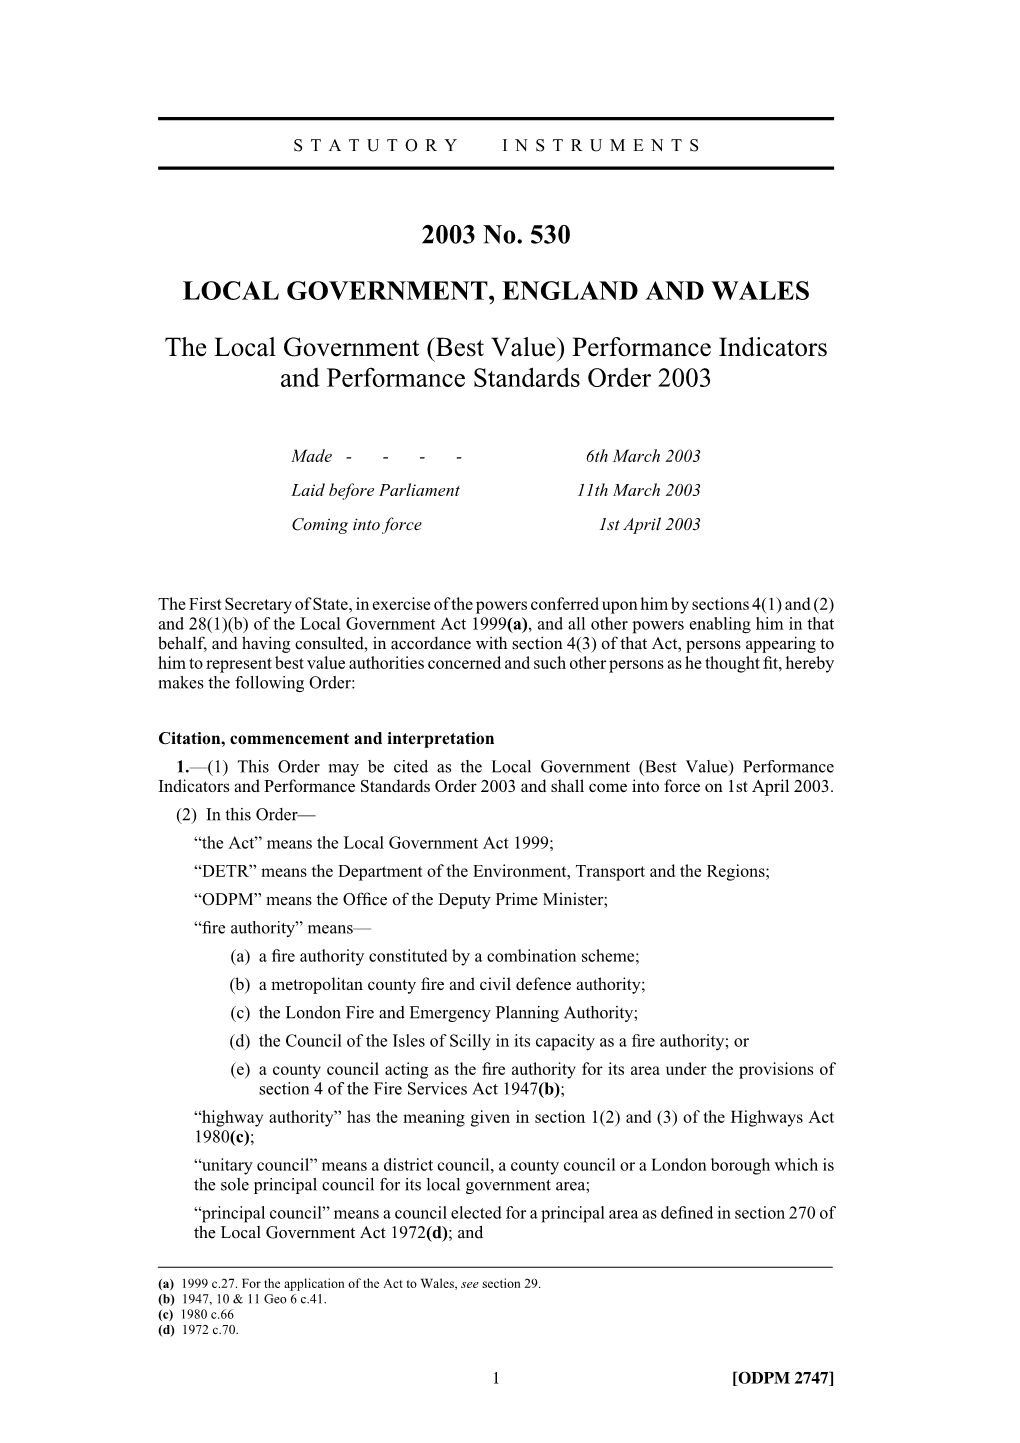 Performance Indicators and Performance Standards Order 2003